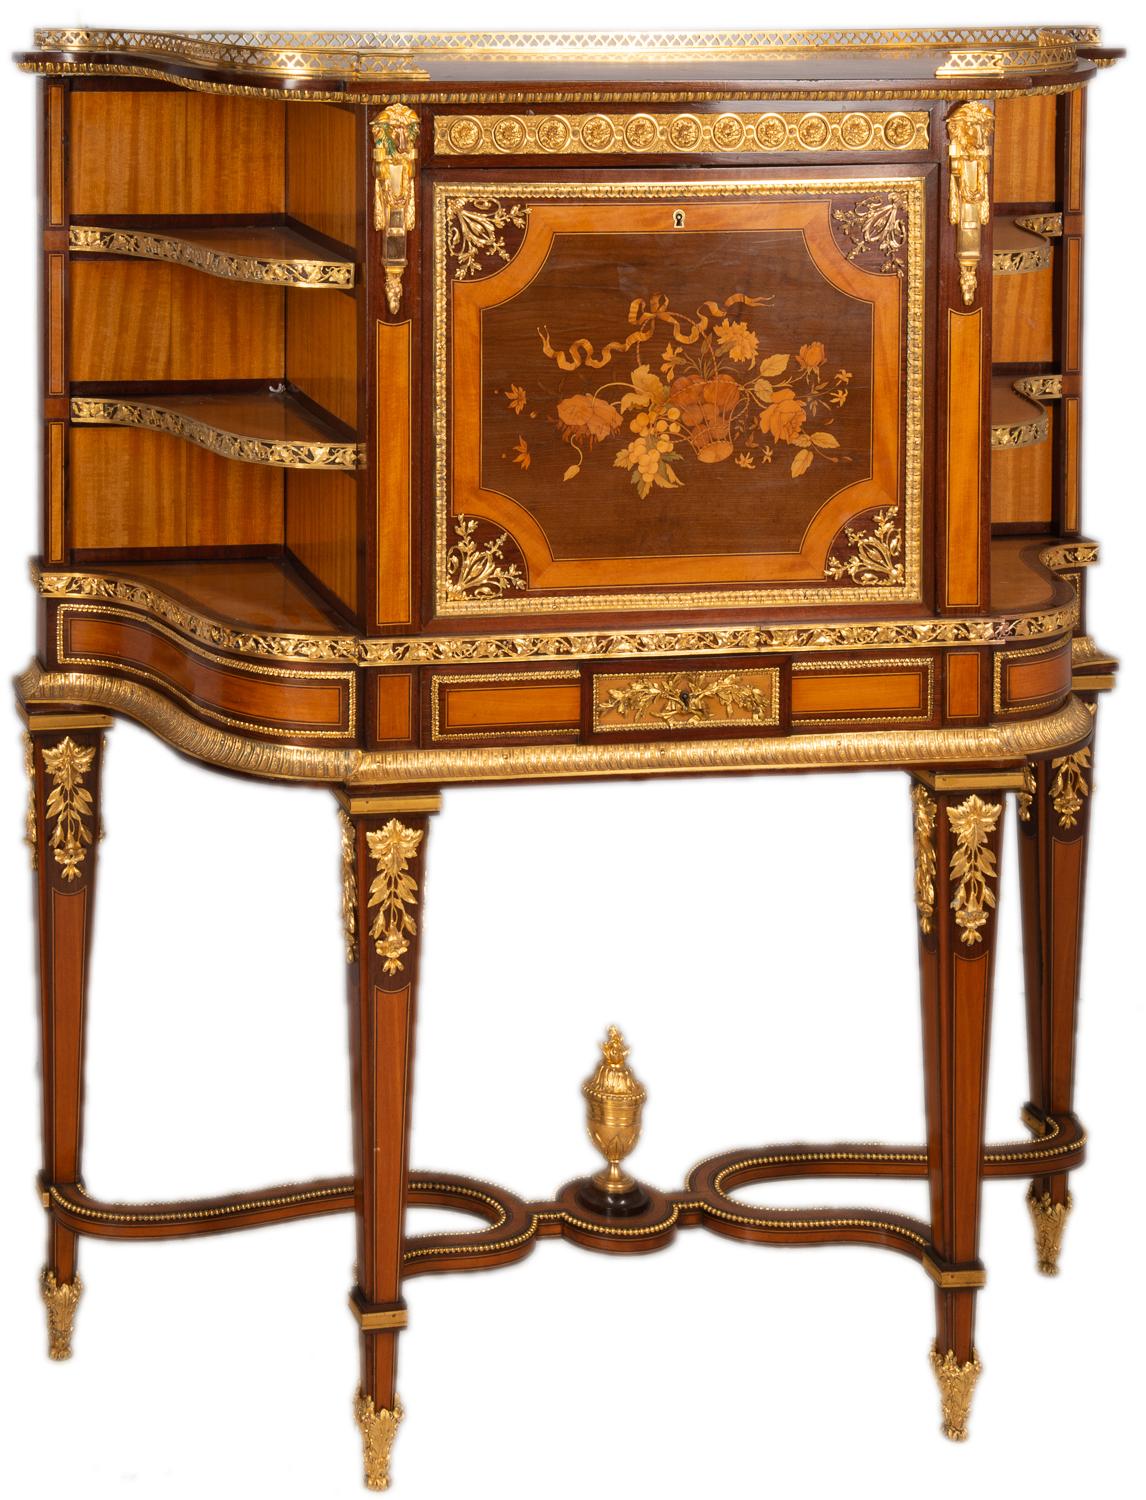 A fine quality 19th century French Louis XVI style satinwood marquetry inlaid secretaire cabinet, with wonderful inlaid decoration to the fall front, opening to reveal a fitted interior of pigeon holes, drawers and an inset leather writing tablet,